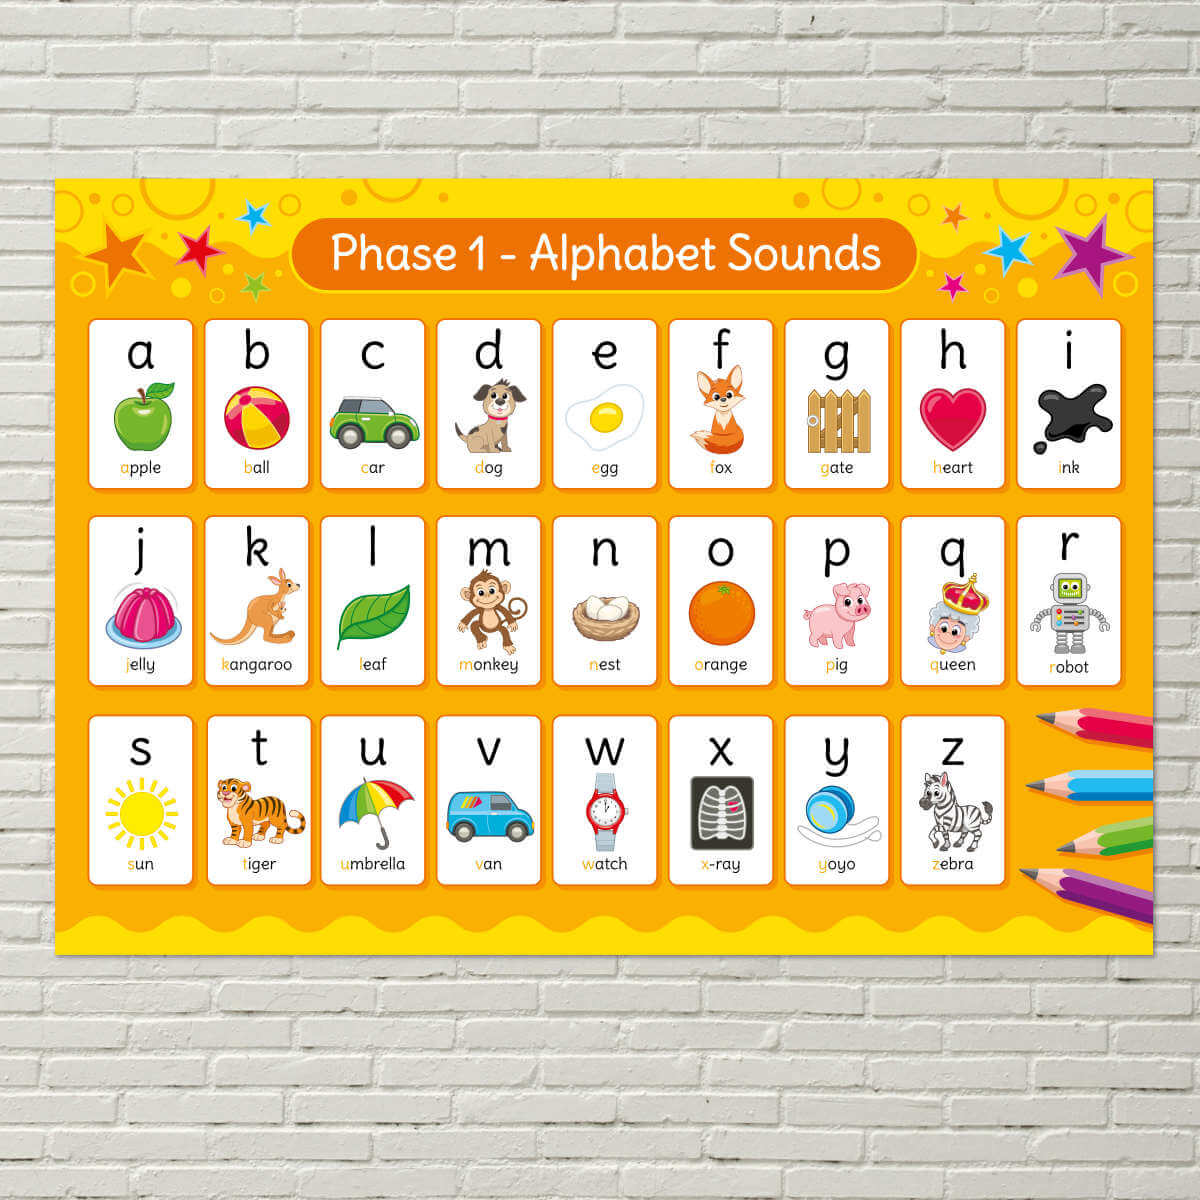 Phonics Phase 1 Alphabet Sounds Poster English Poster for Schools